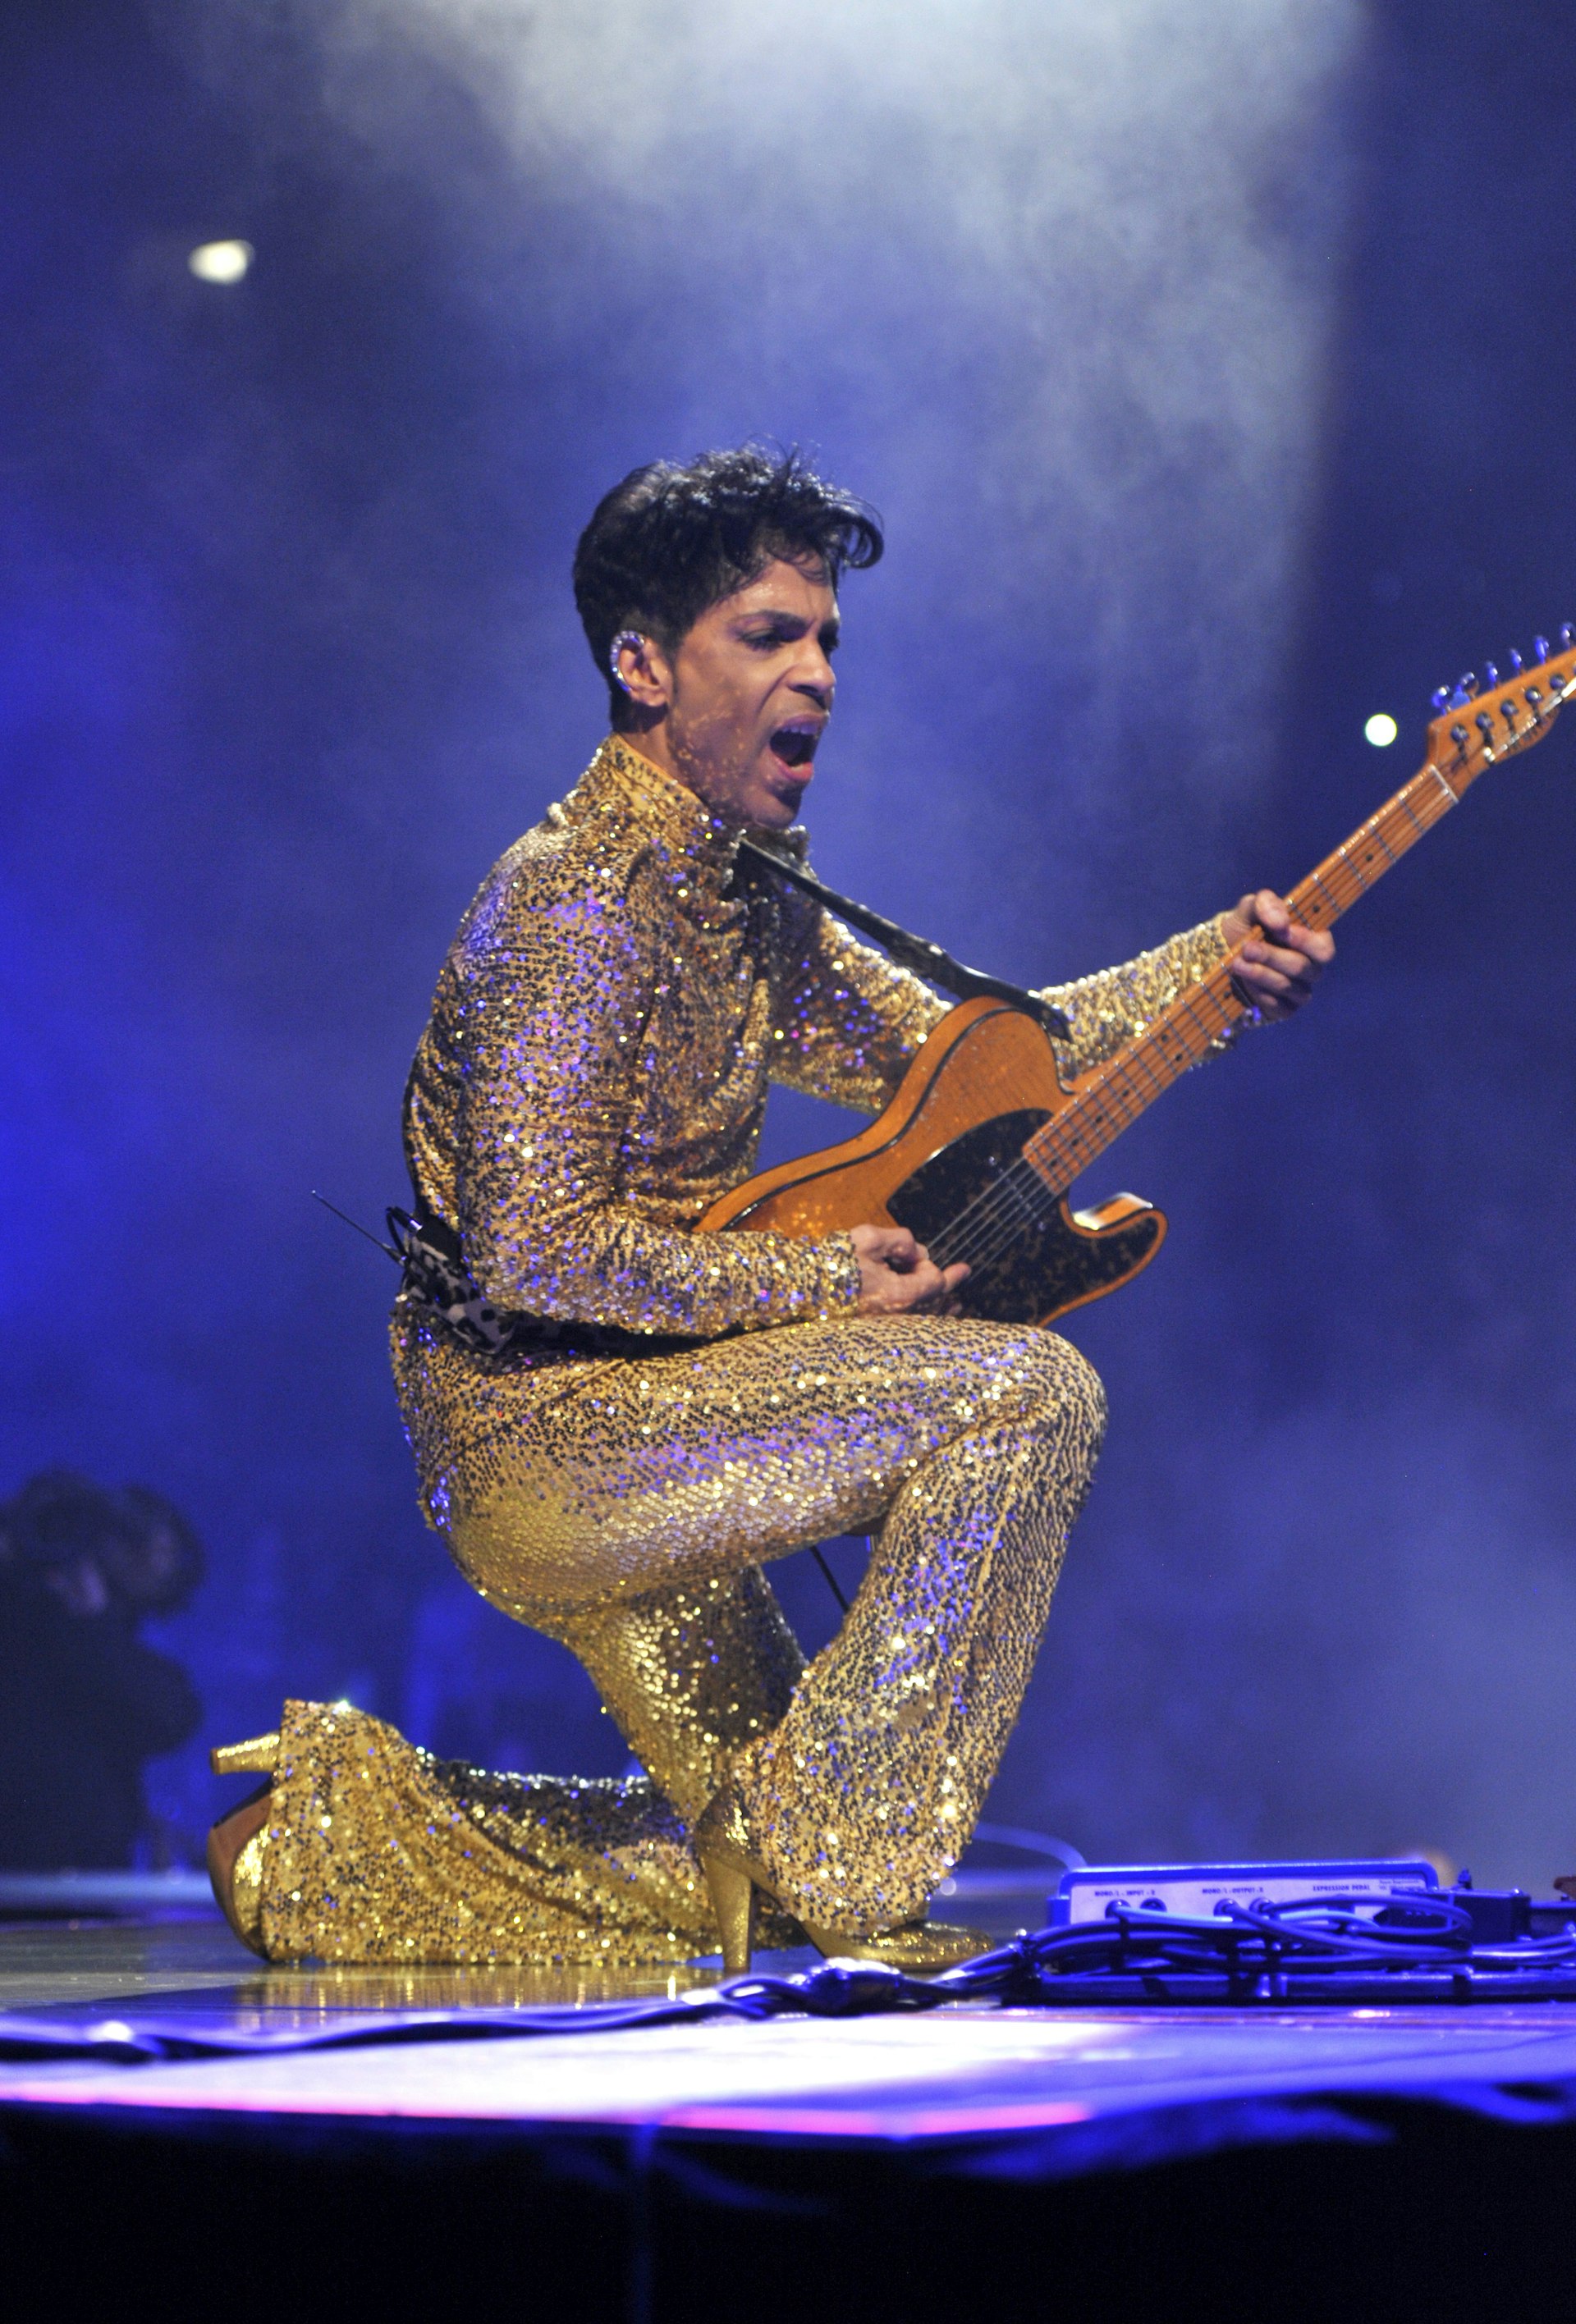 Prince performing his "Welcome 2 America" tour at Madison Square Garden in February 2011 